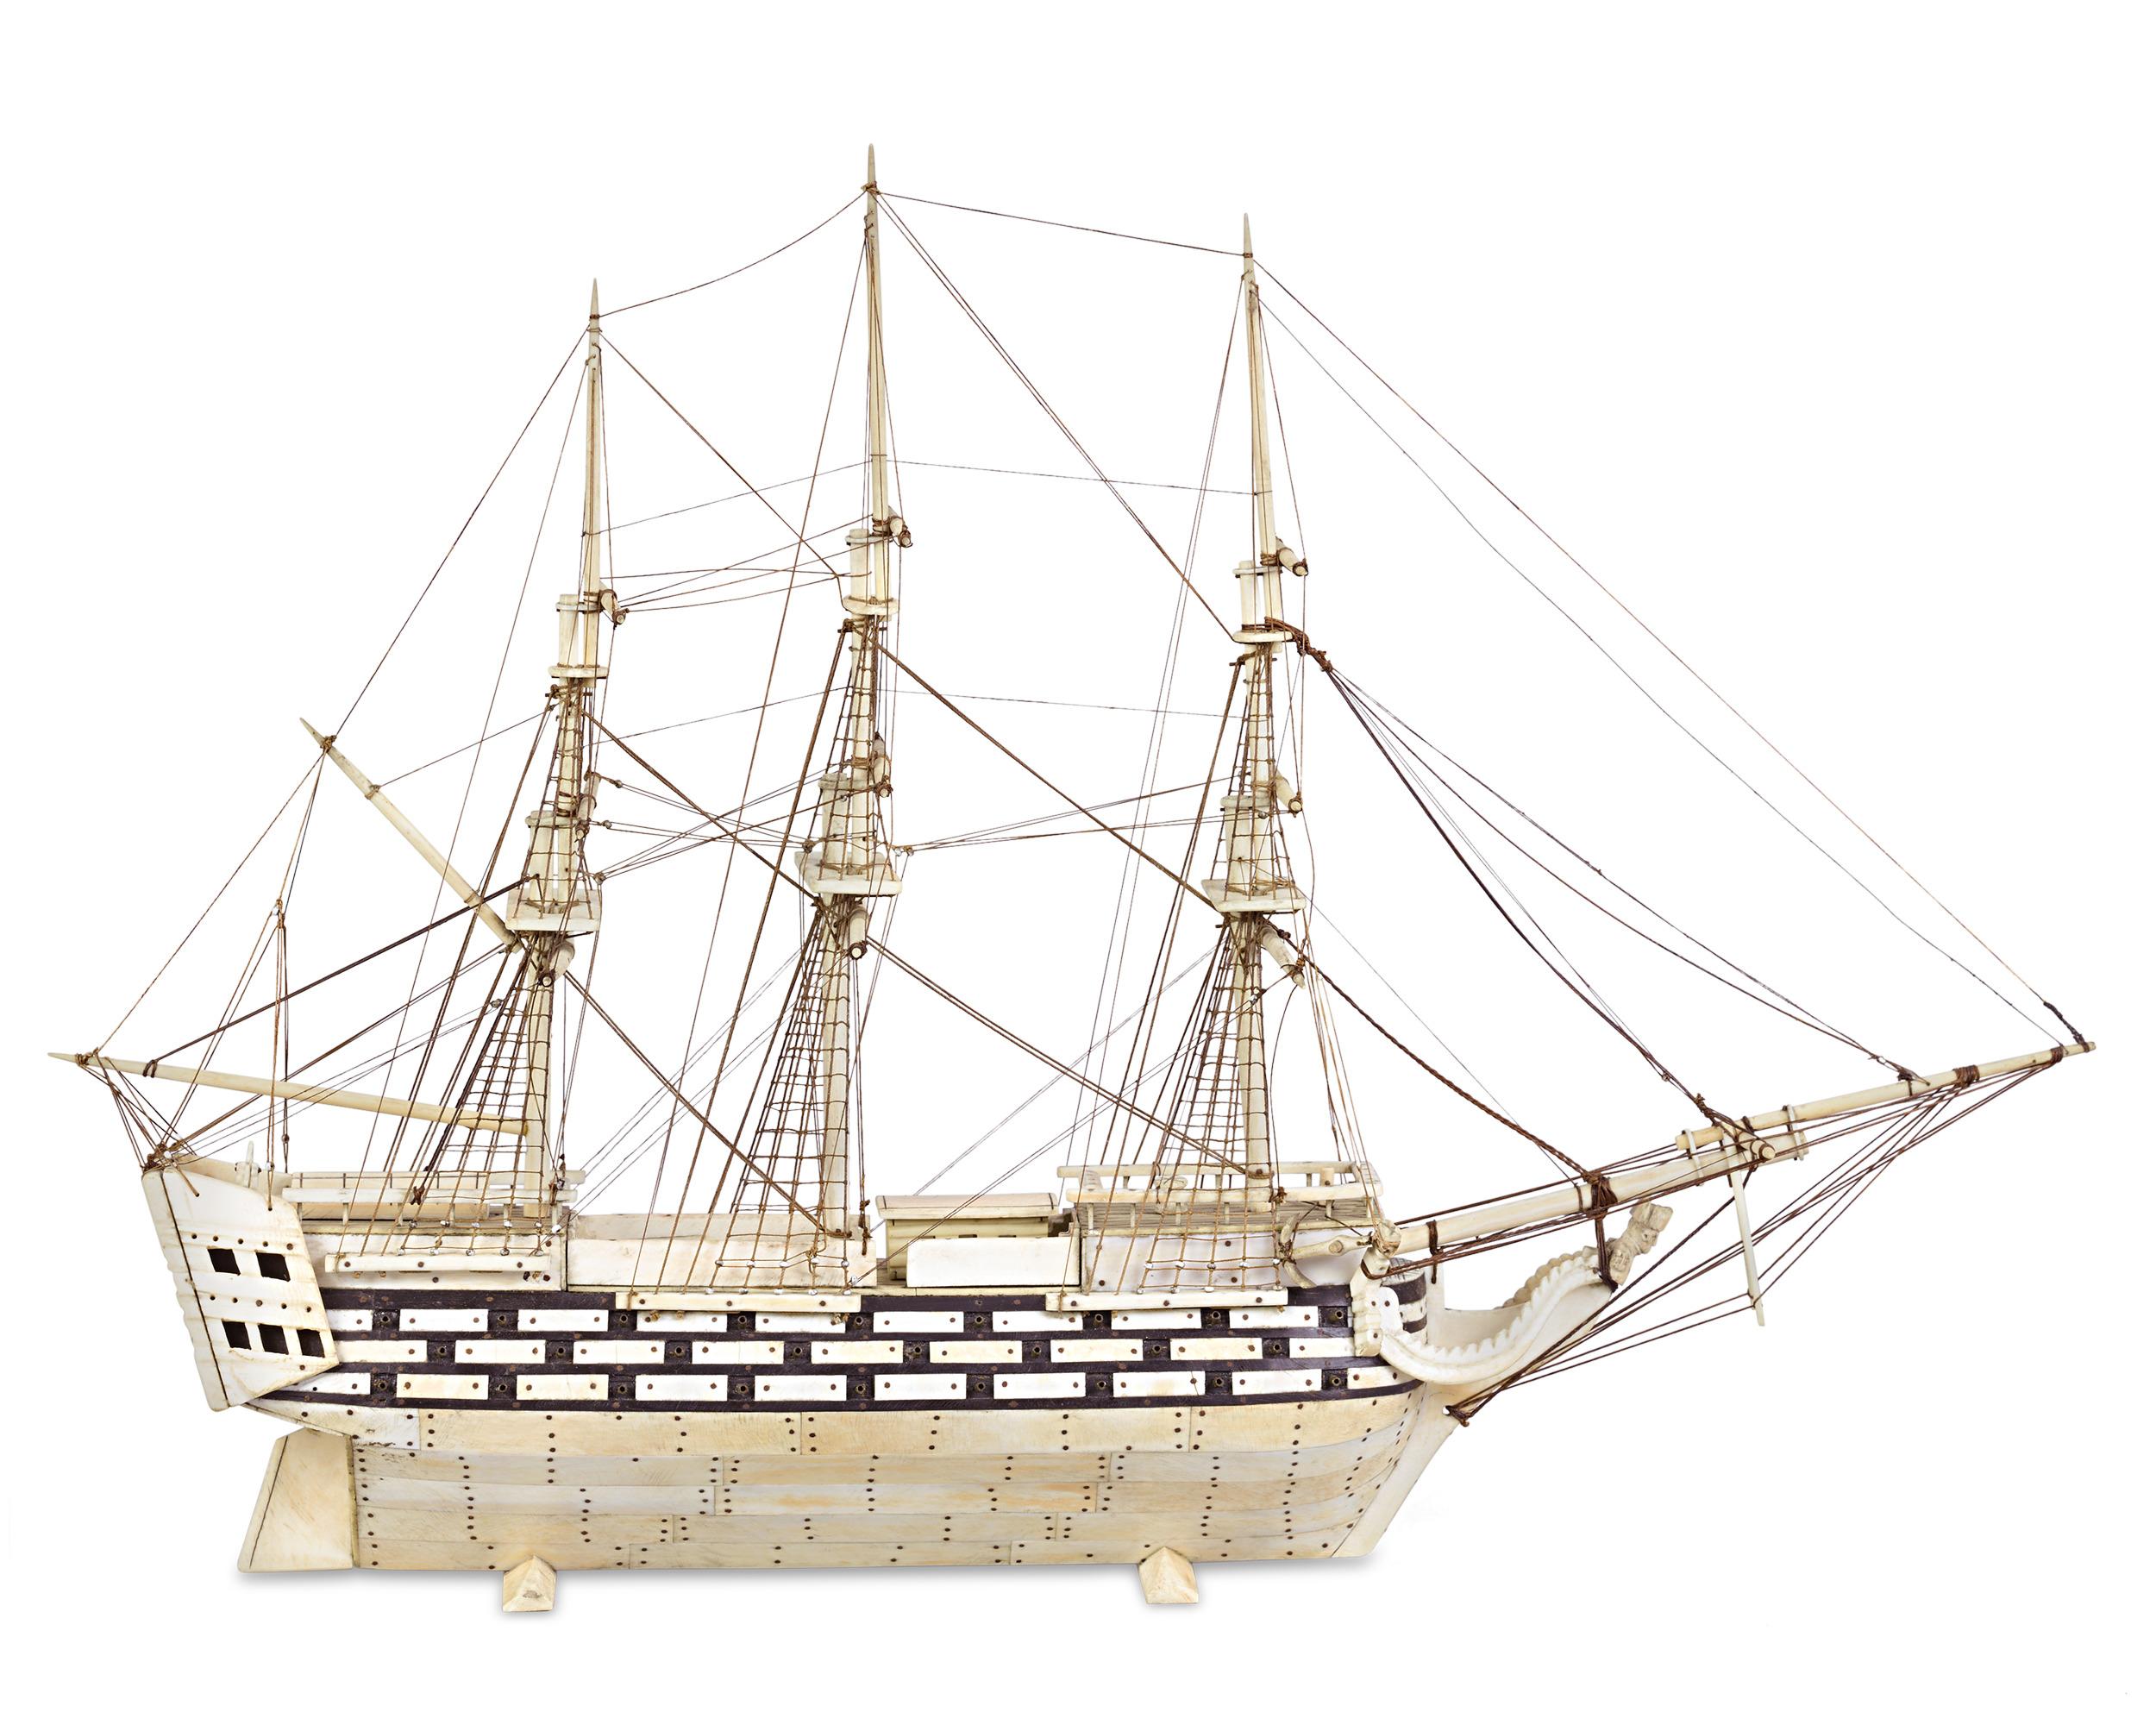 An incredible and extremely rare artifact of world history, this monumental model of the HMS Victory was created during the Napoléonic Wars by a French prisoner of war. Formed from bone and horn, every detail of this historic ship has been carefully